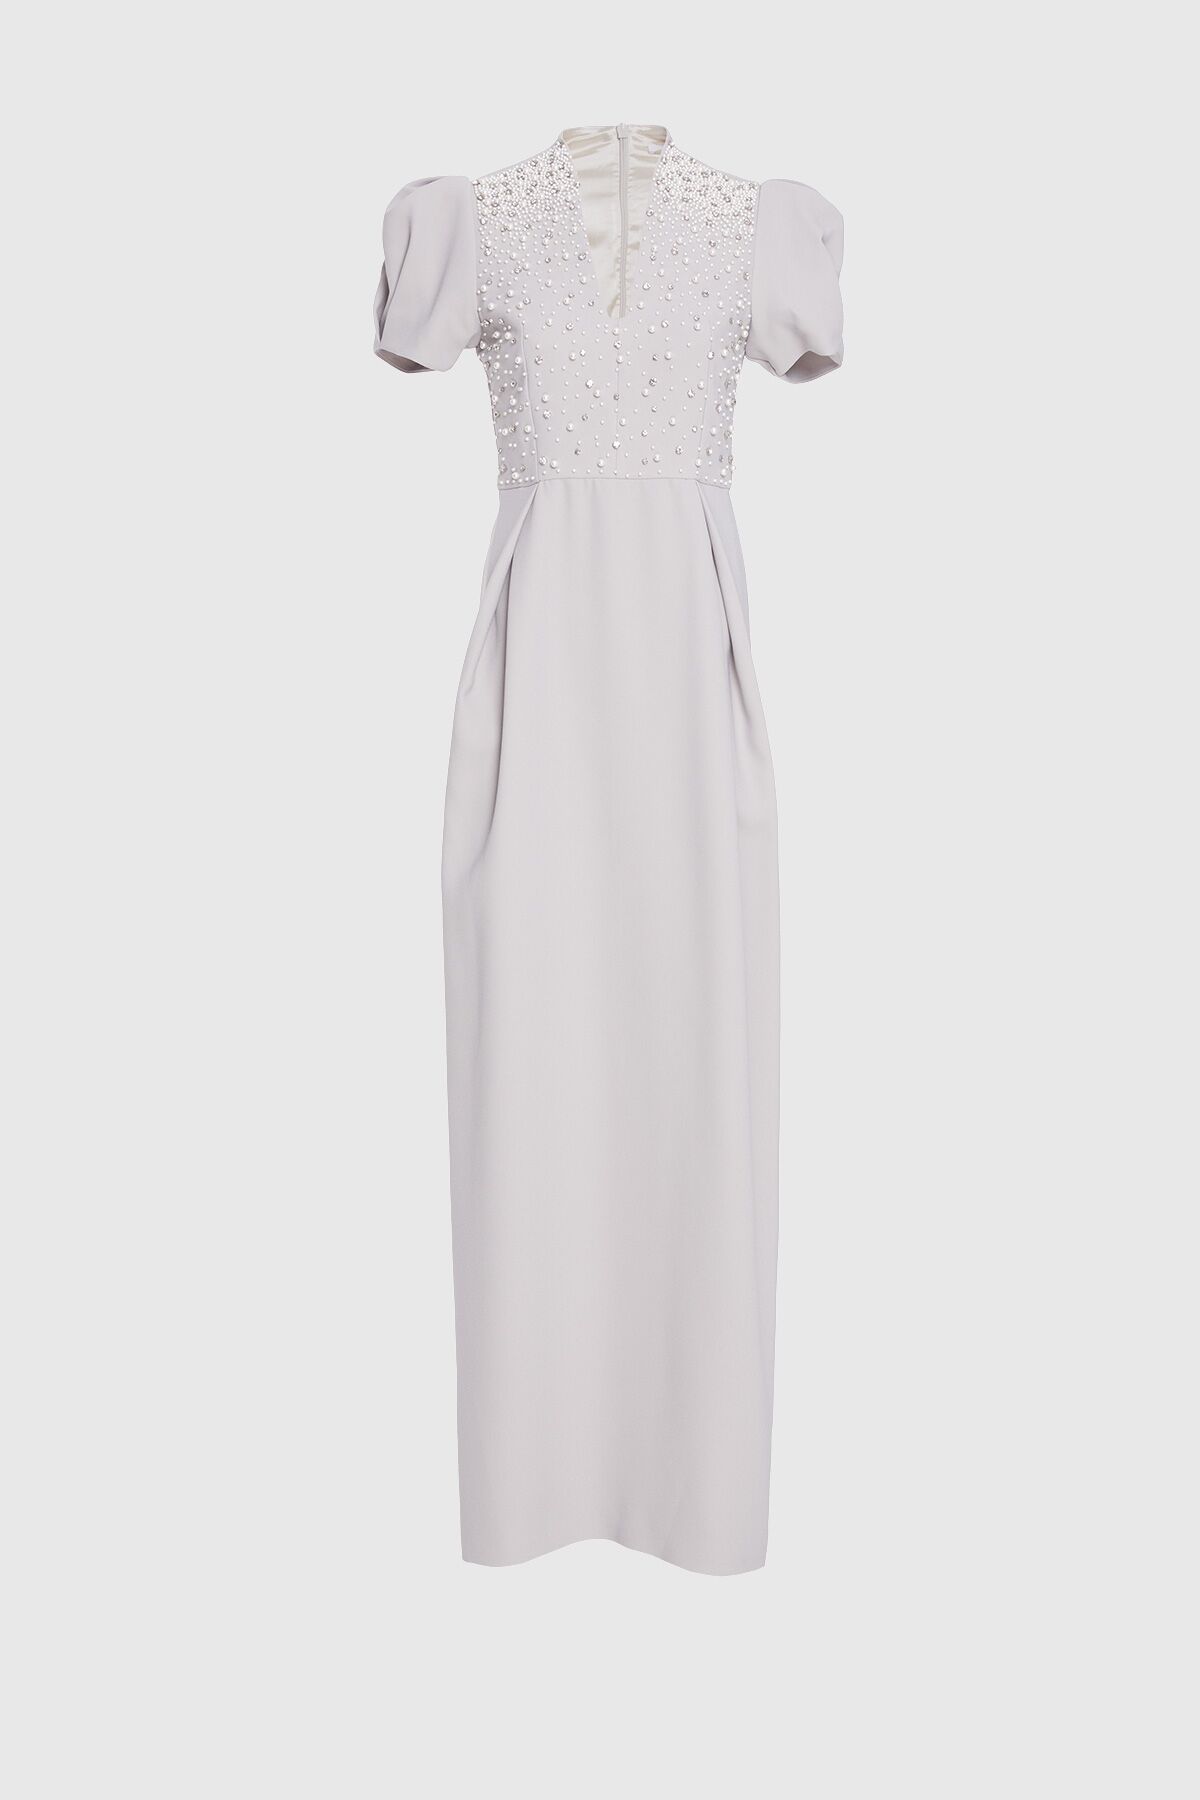  GIZIA - V-Neck Stone Pearl Embroidered Long Gray Evening Dress